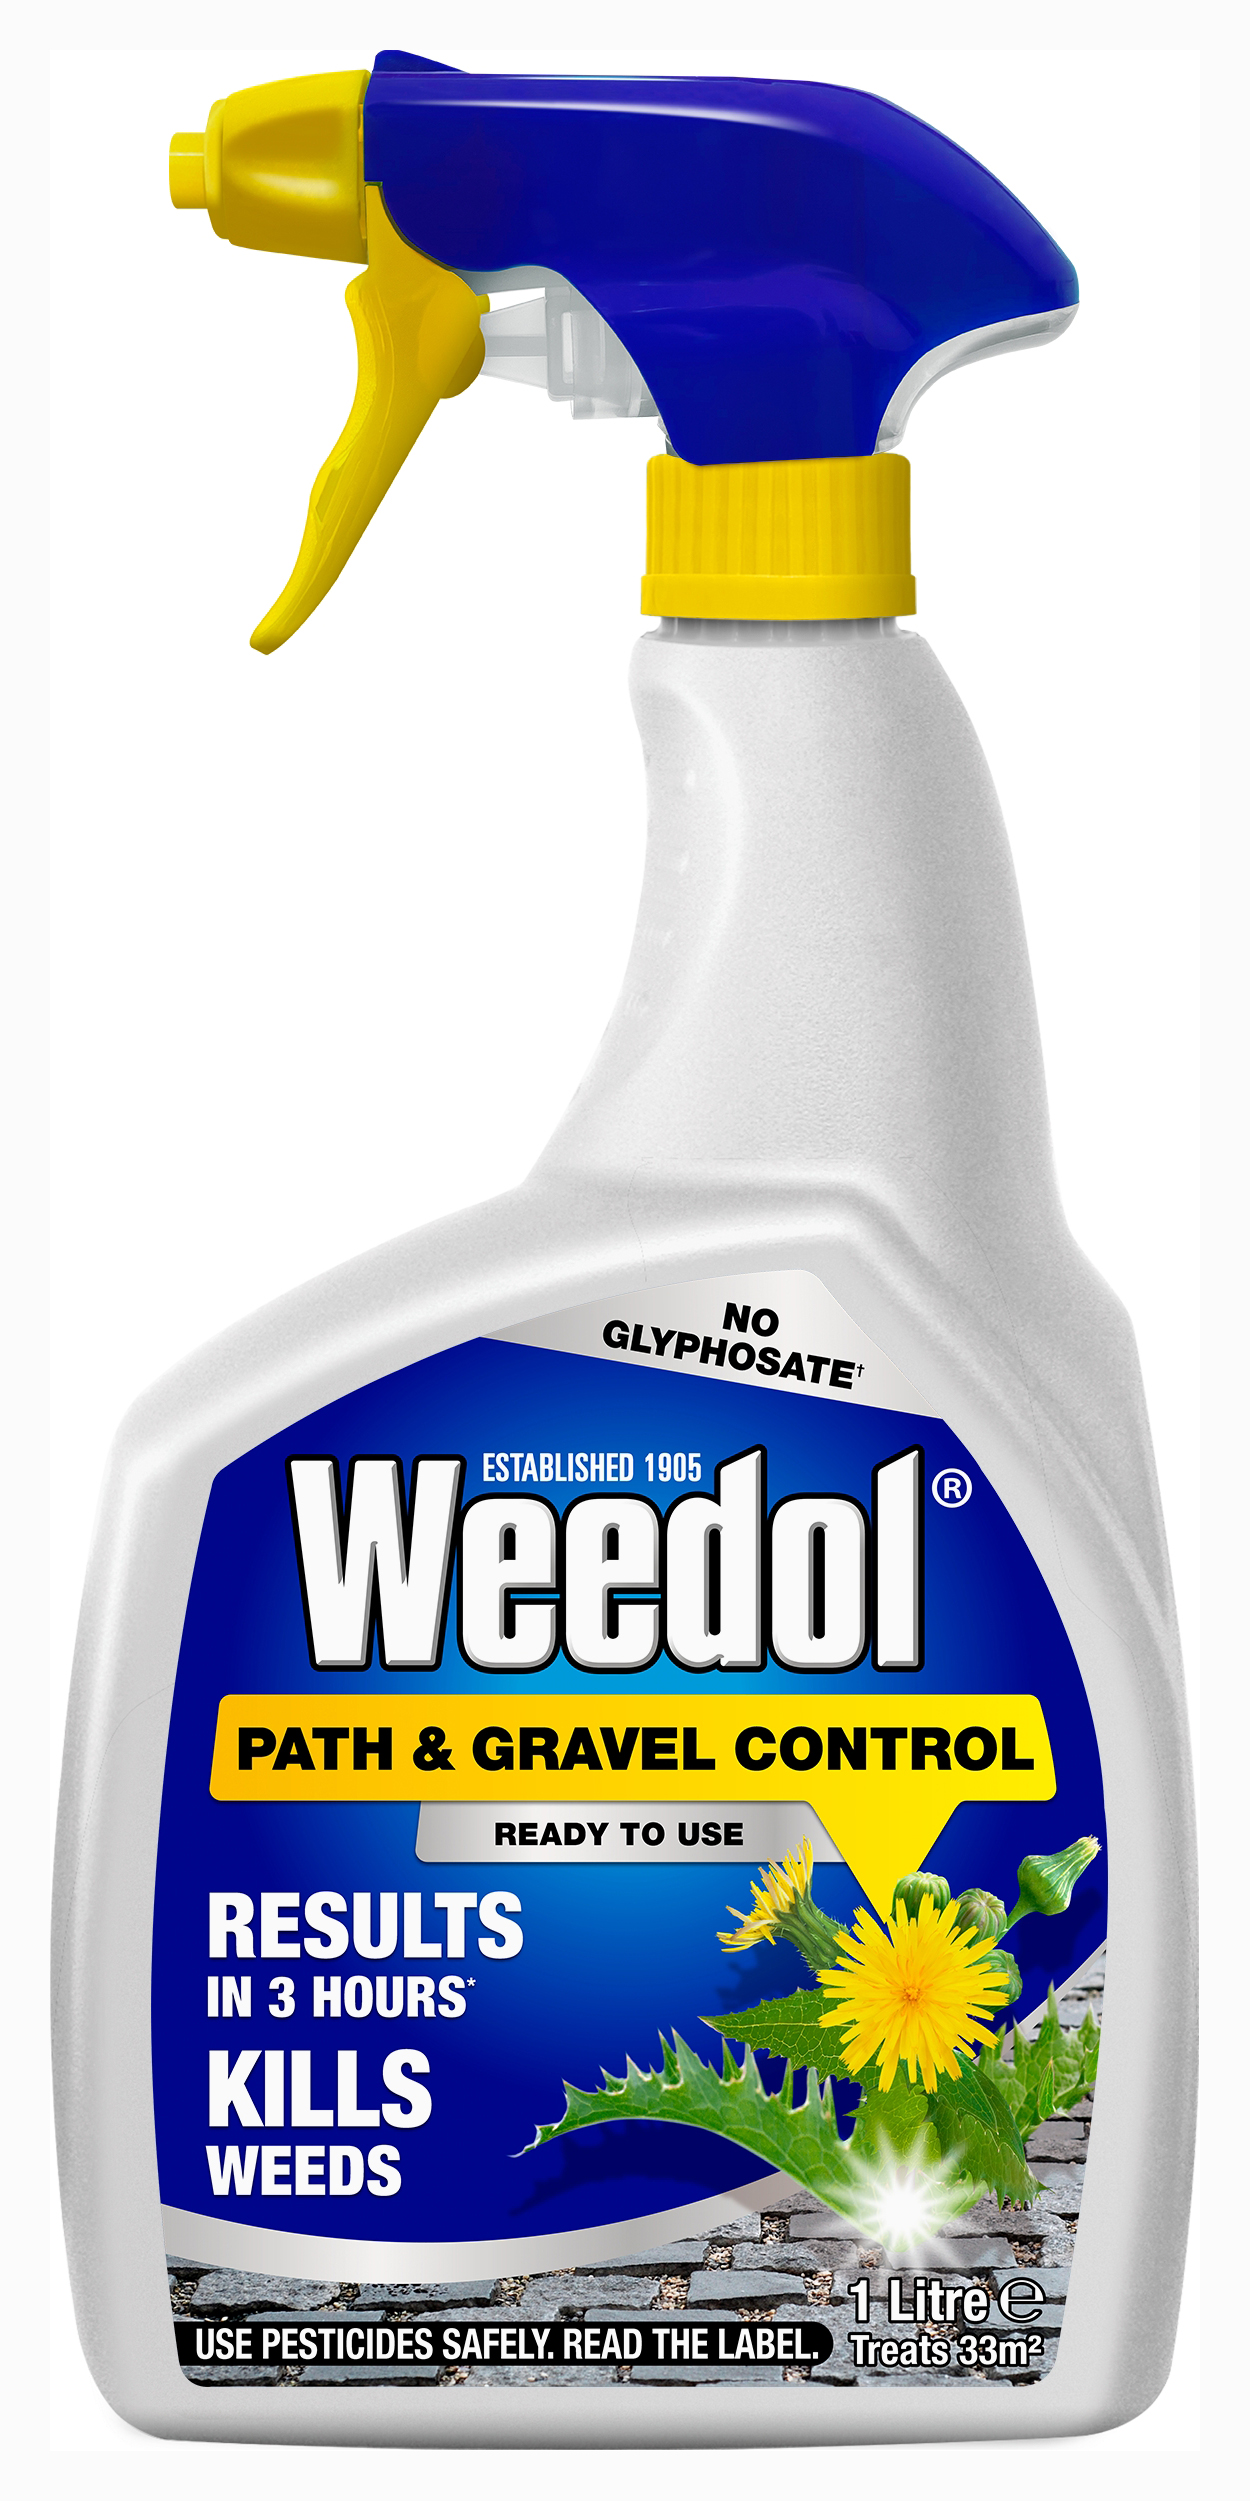 Image of Weedol Ready To Use Path & Gravel Weed Killer - 1L